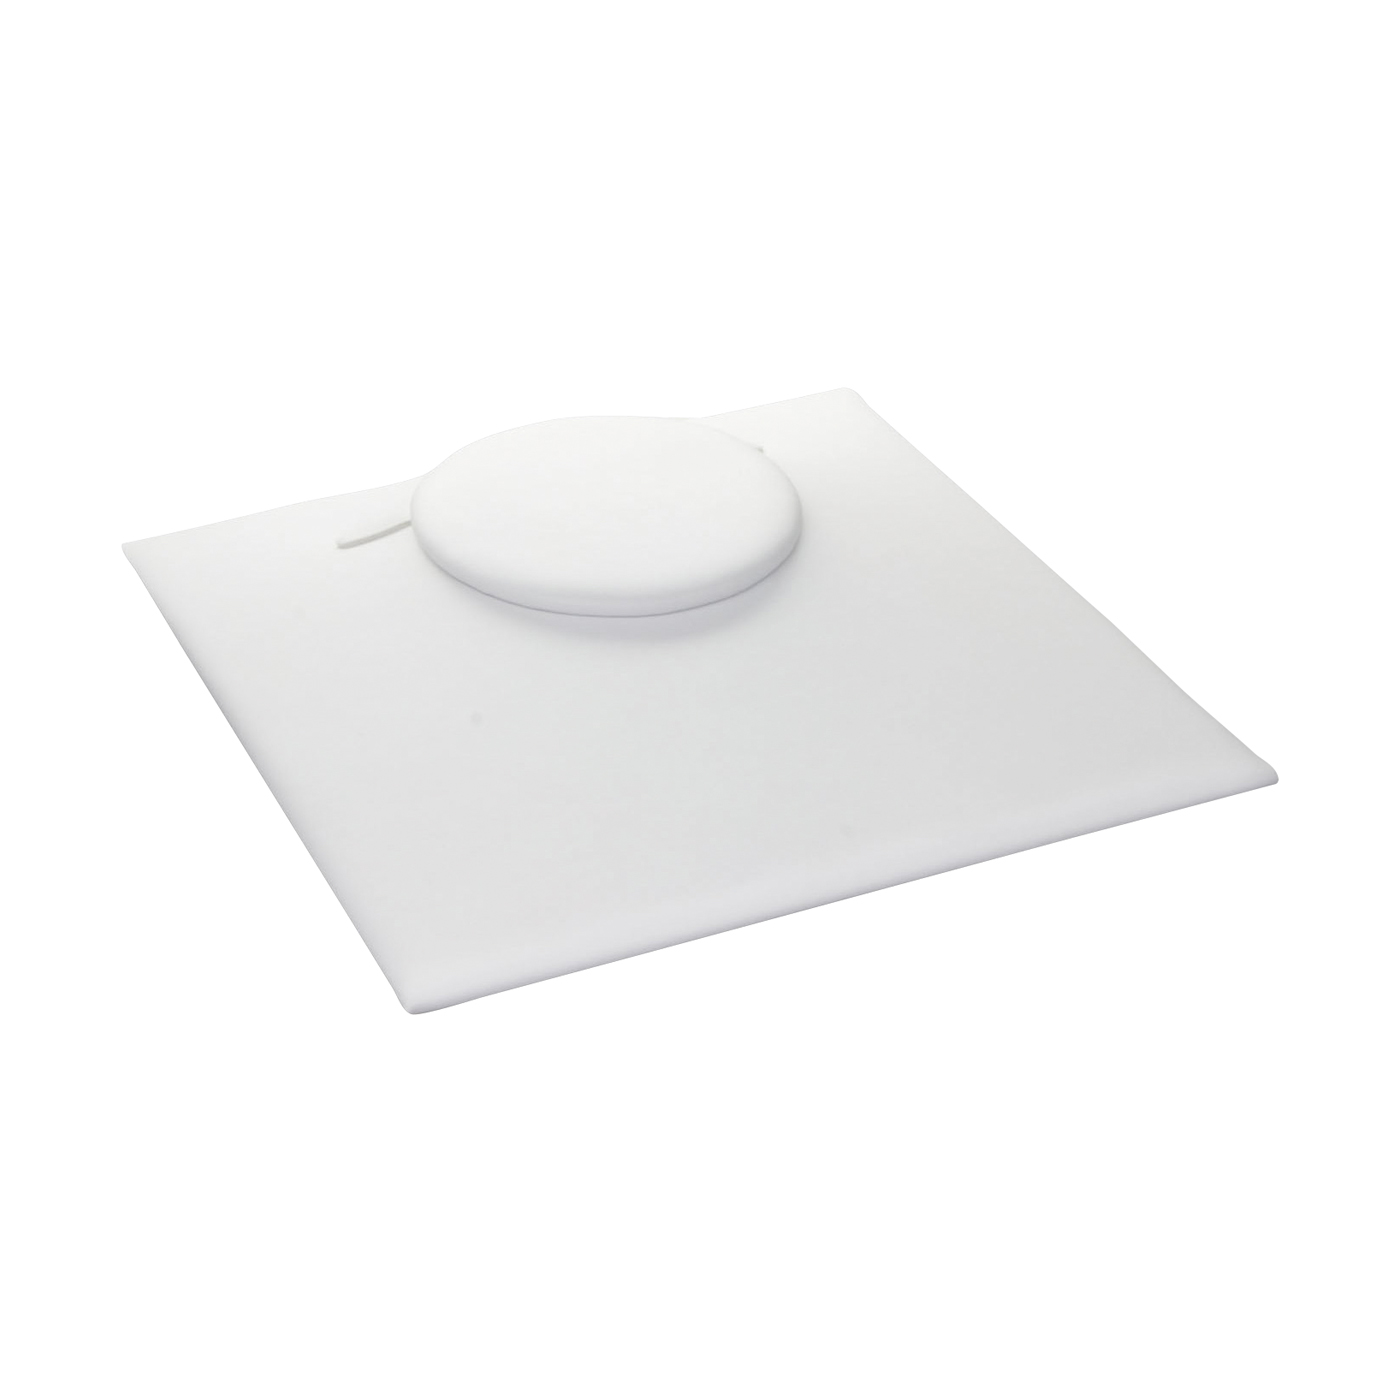 Tray System Inlay, White, for 1 Necklace, 224 x 224 mm - 1 piece